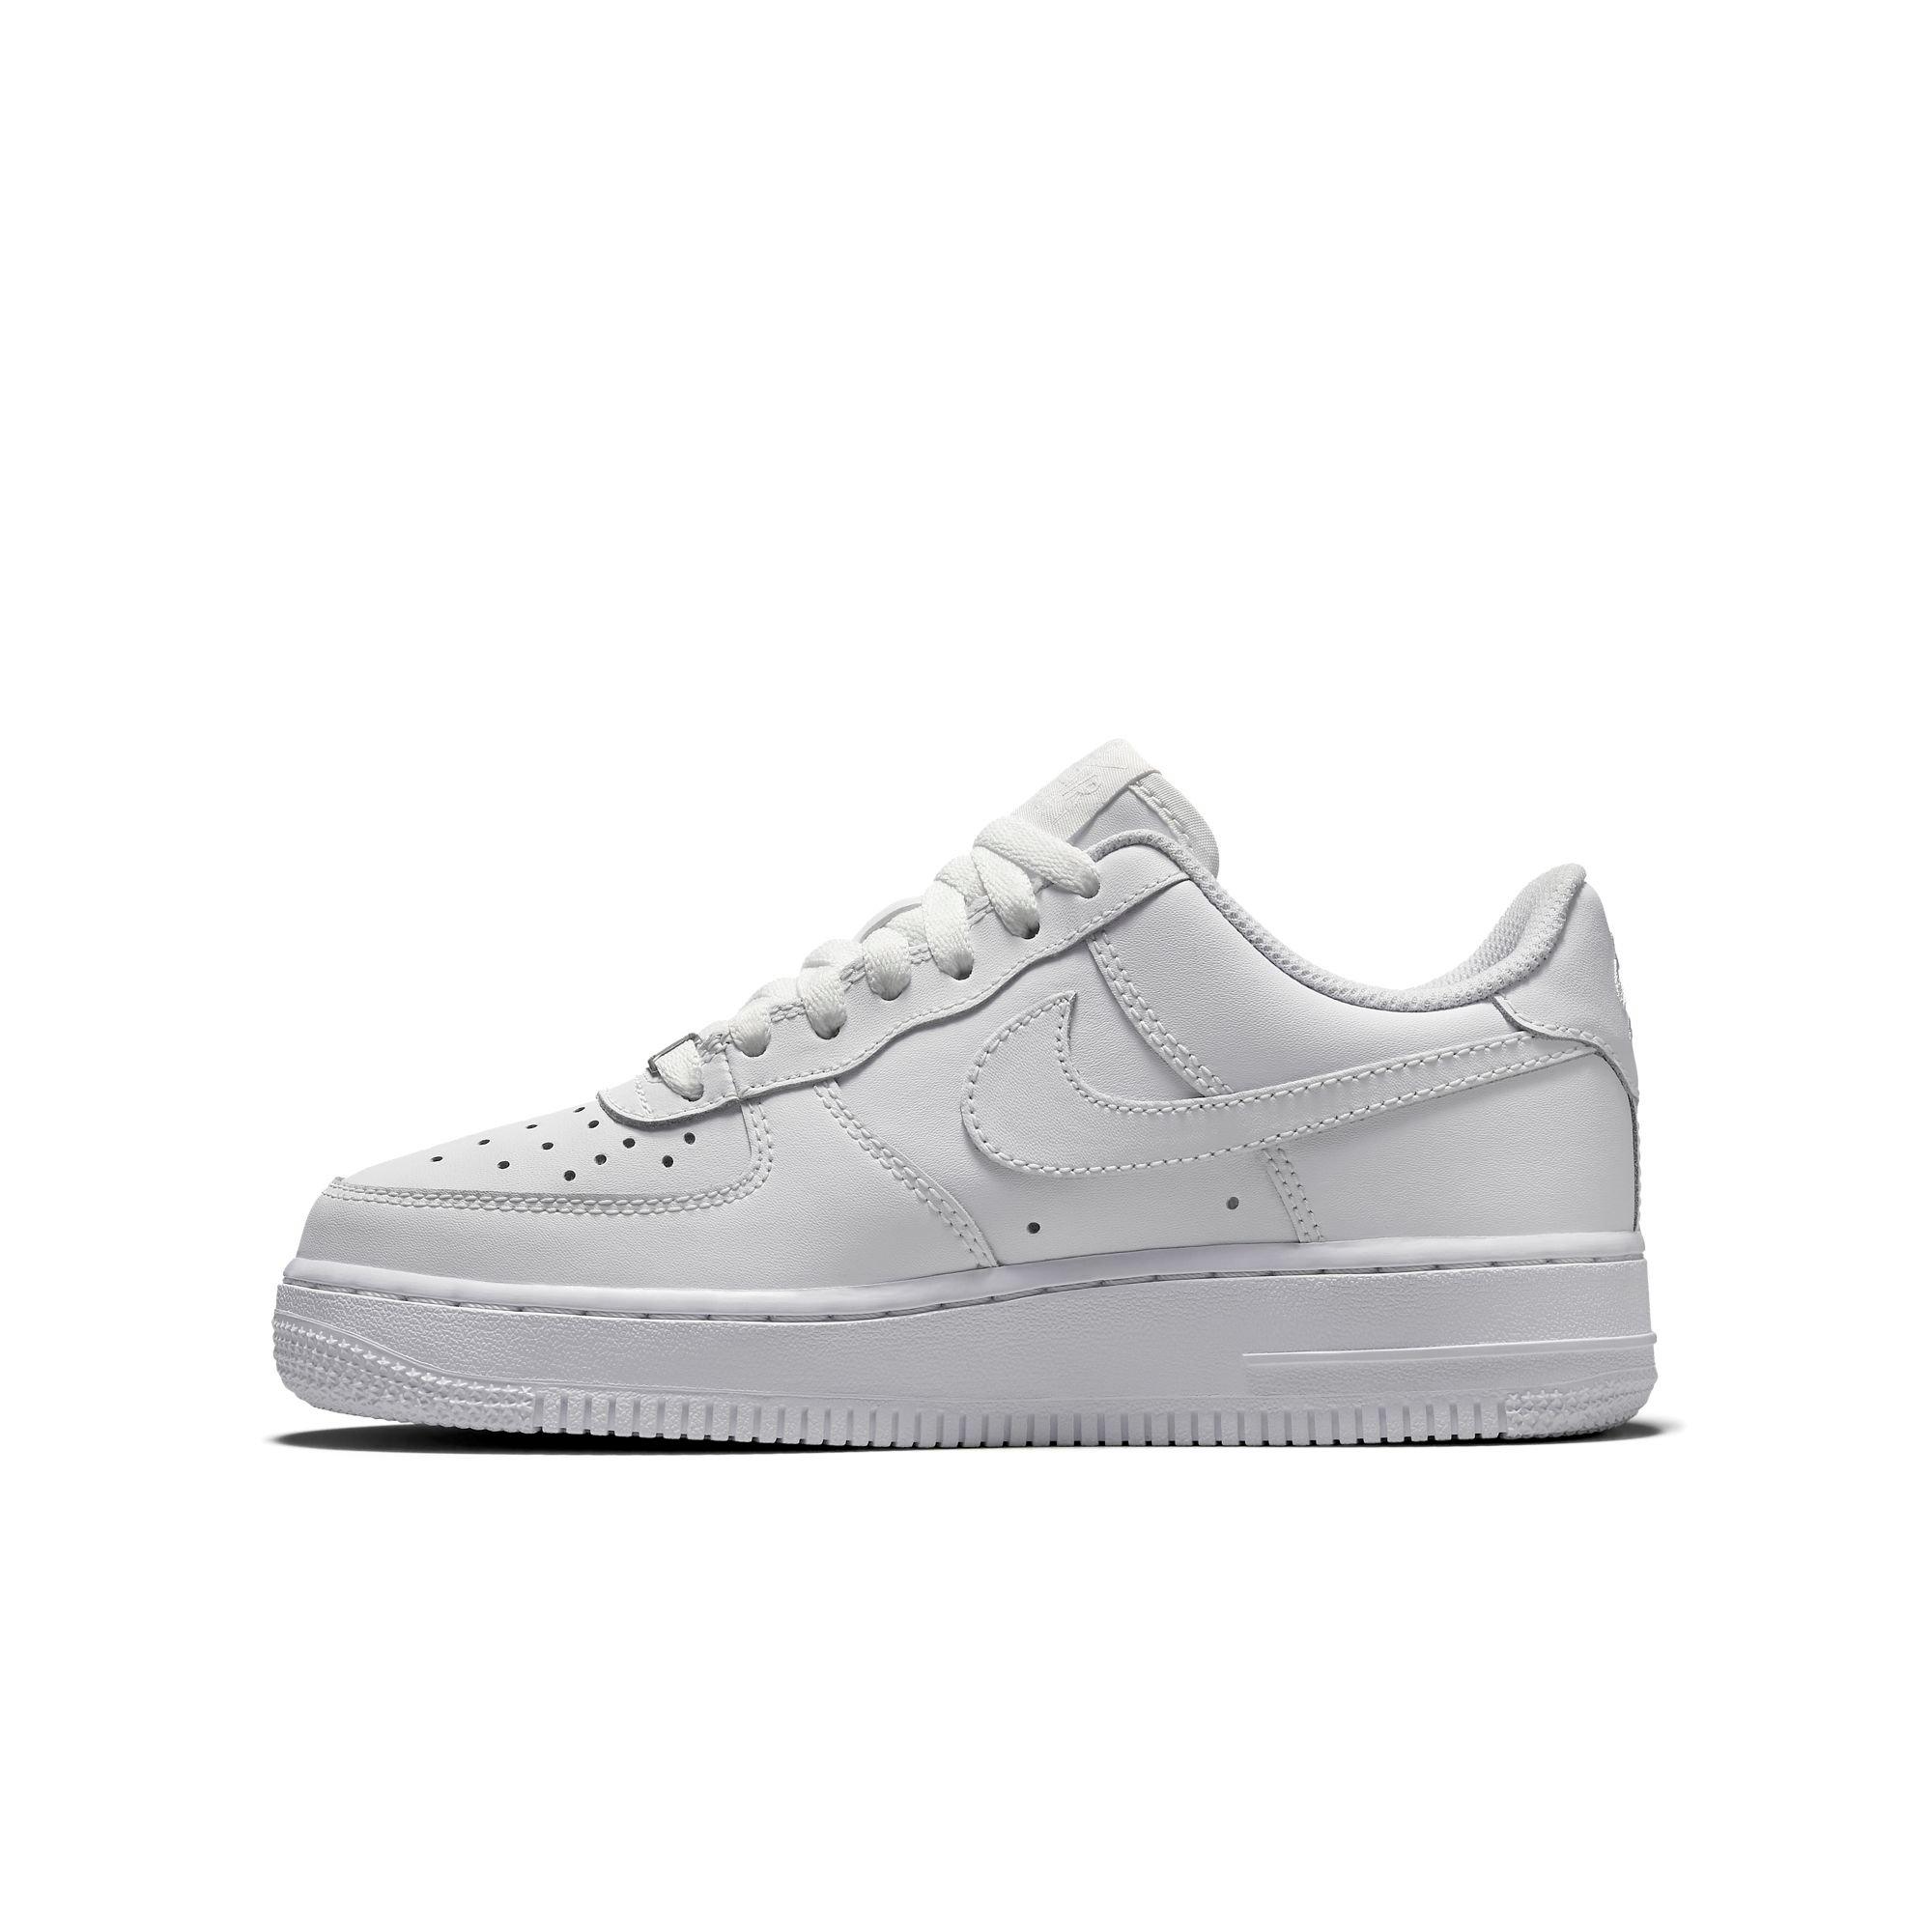 nike air force 1 size 4.5 white